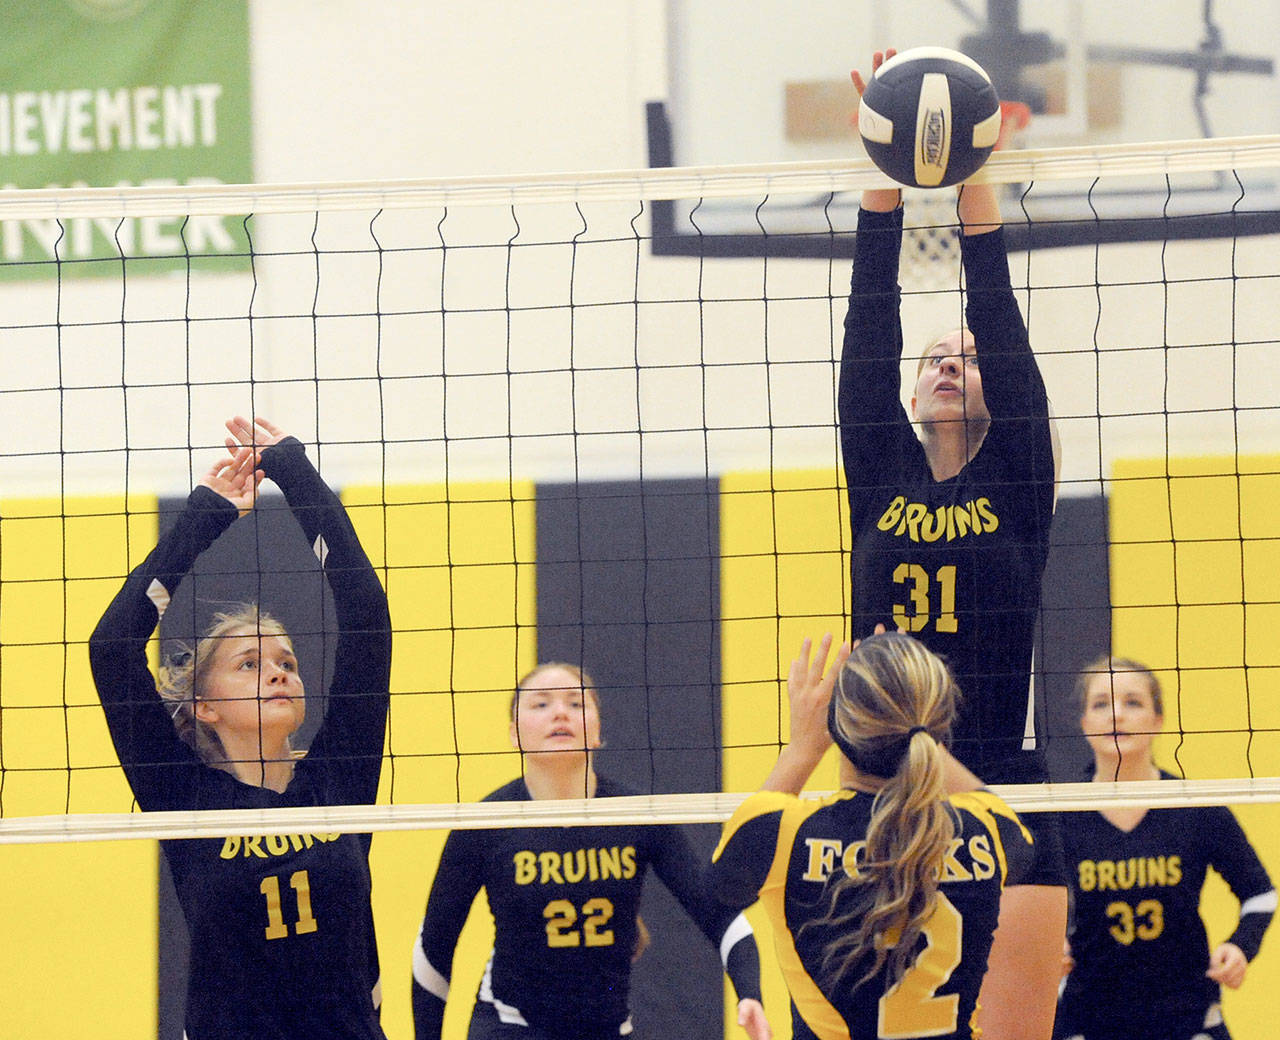 Miriam Wonderly (31) for Clallam Bay goes for the block against Forks’ Julia Lausche Monday in Clallam Bay where Forks defeated the Bruins 3-1. Also in on the action for Clallam Bay are from left Kaitlyn Tyree (11), Hannah Olson (22), and Kaitlyn Willis (33). (Lonnie Archibald/for Peninsula Daily News)                                Clallam Bay’s Miriam Wonderly (31) goes for the block against Forks’ Julia Lauscheduring the Spartans 3-1 win over the Bruins. Also in on the action for Clallam Bay are from left Kaitlyn Tyree (11), Hannah Olson (22), and Kaitlyn Willis (33).                                Lonnie Archibald/for Peninsula Daily News